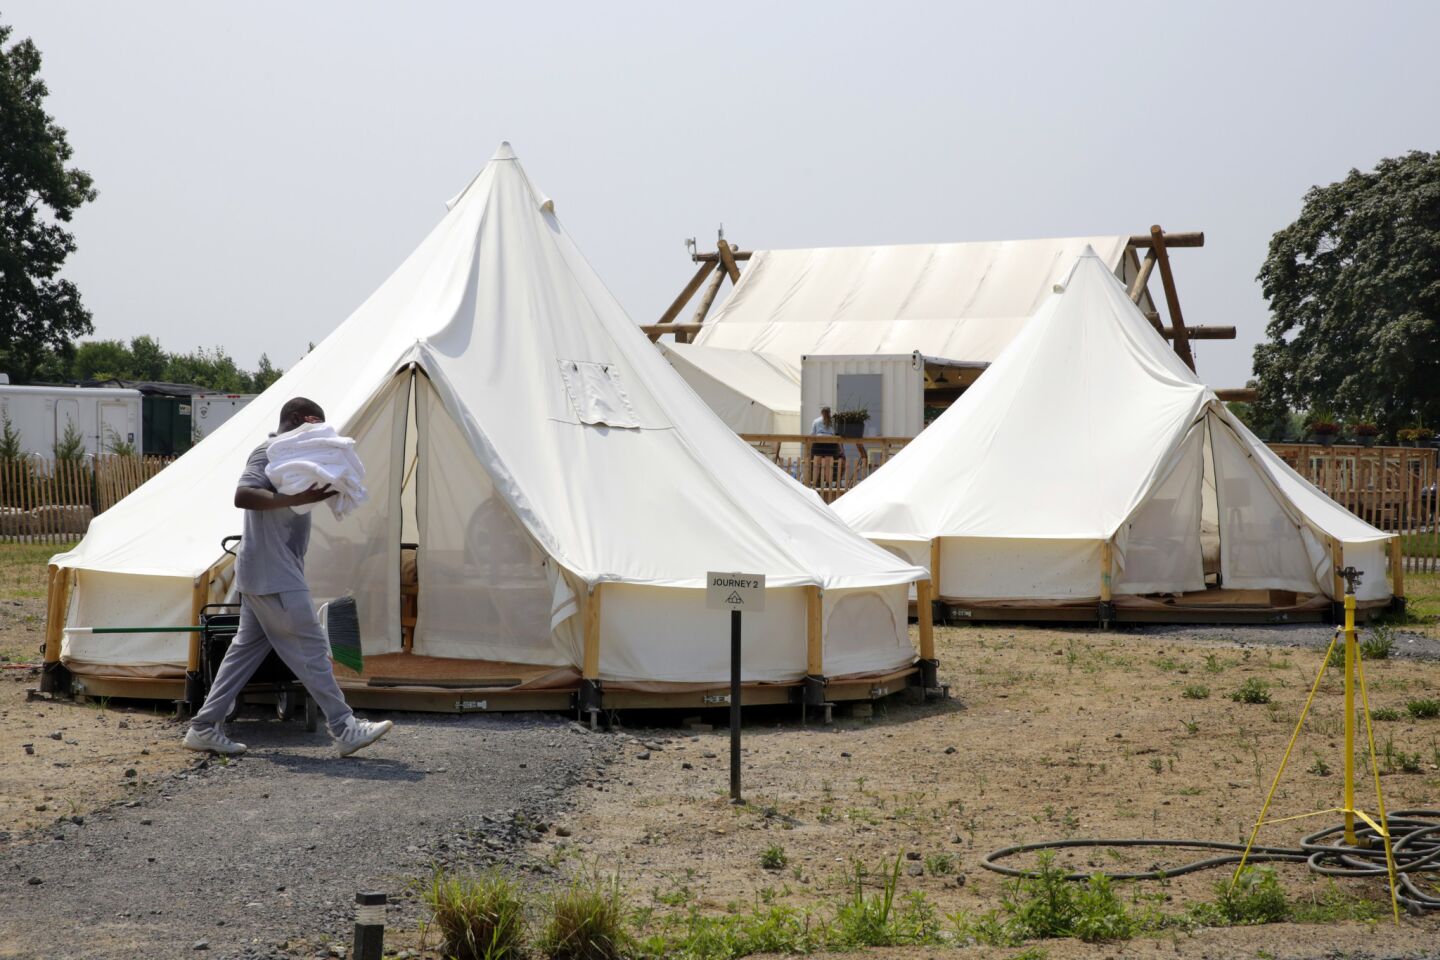 Collective Governors Island, a retreat site in New York Harbor, offers luxury tent stays.